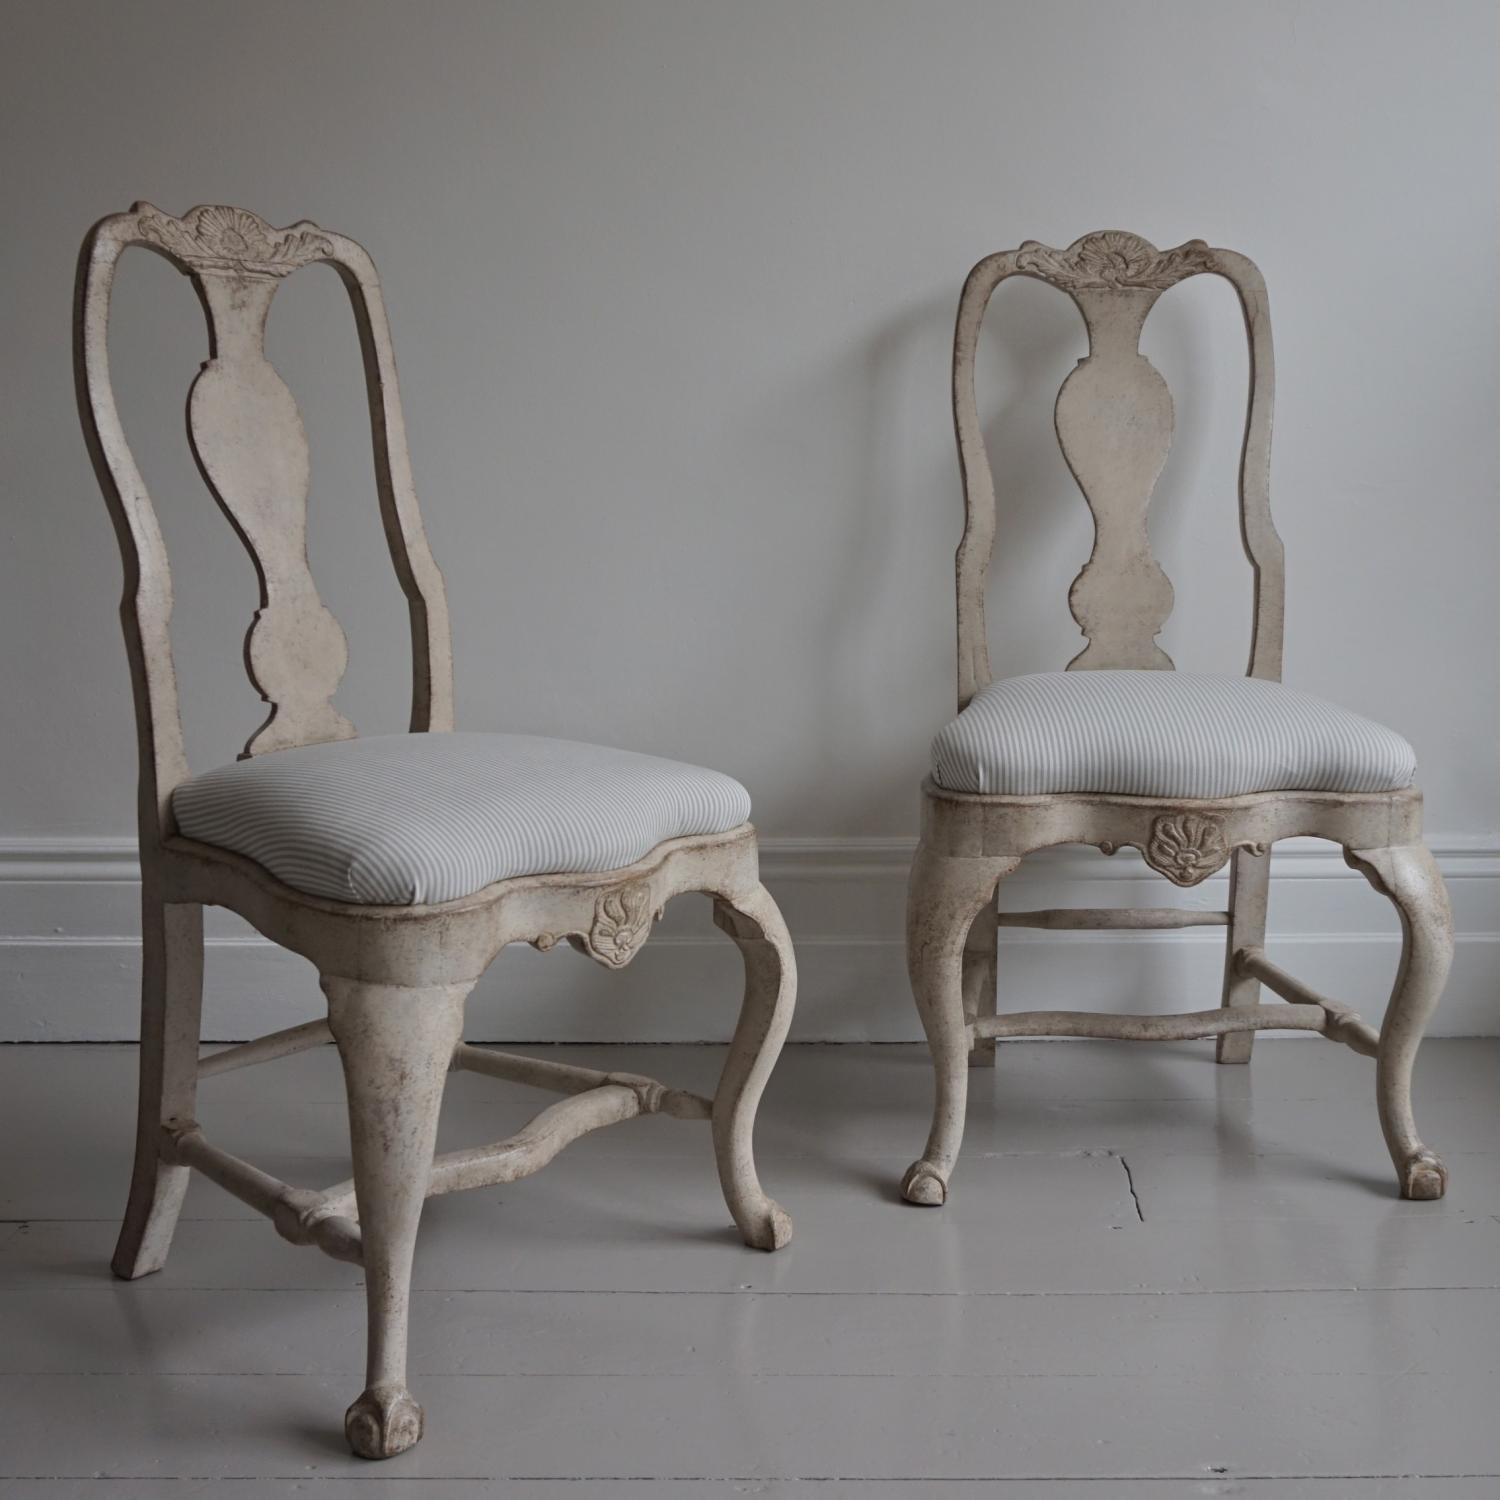 EXCEPTIONAL PAIR OF ROCOCO PERIOD CHAIRS